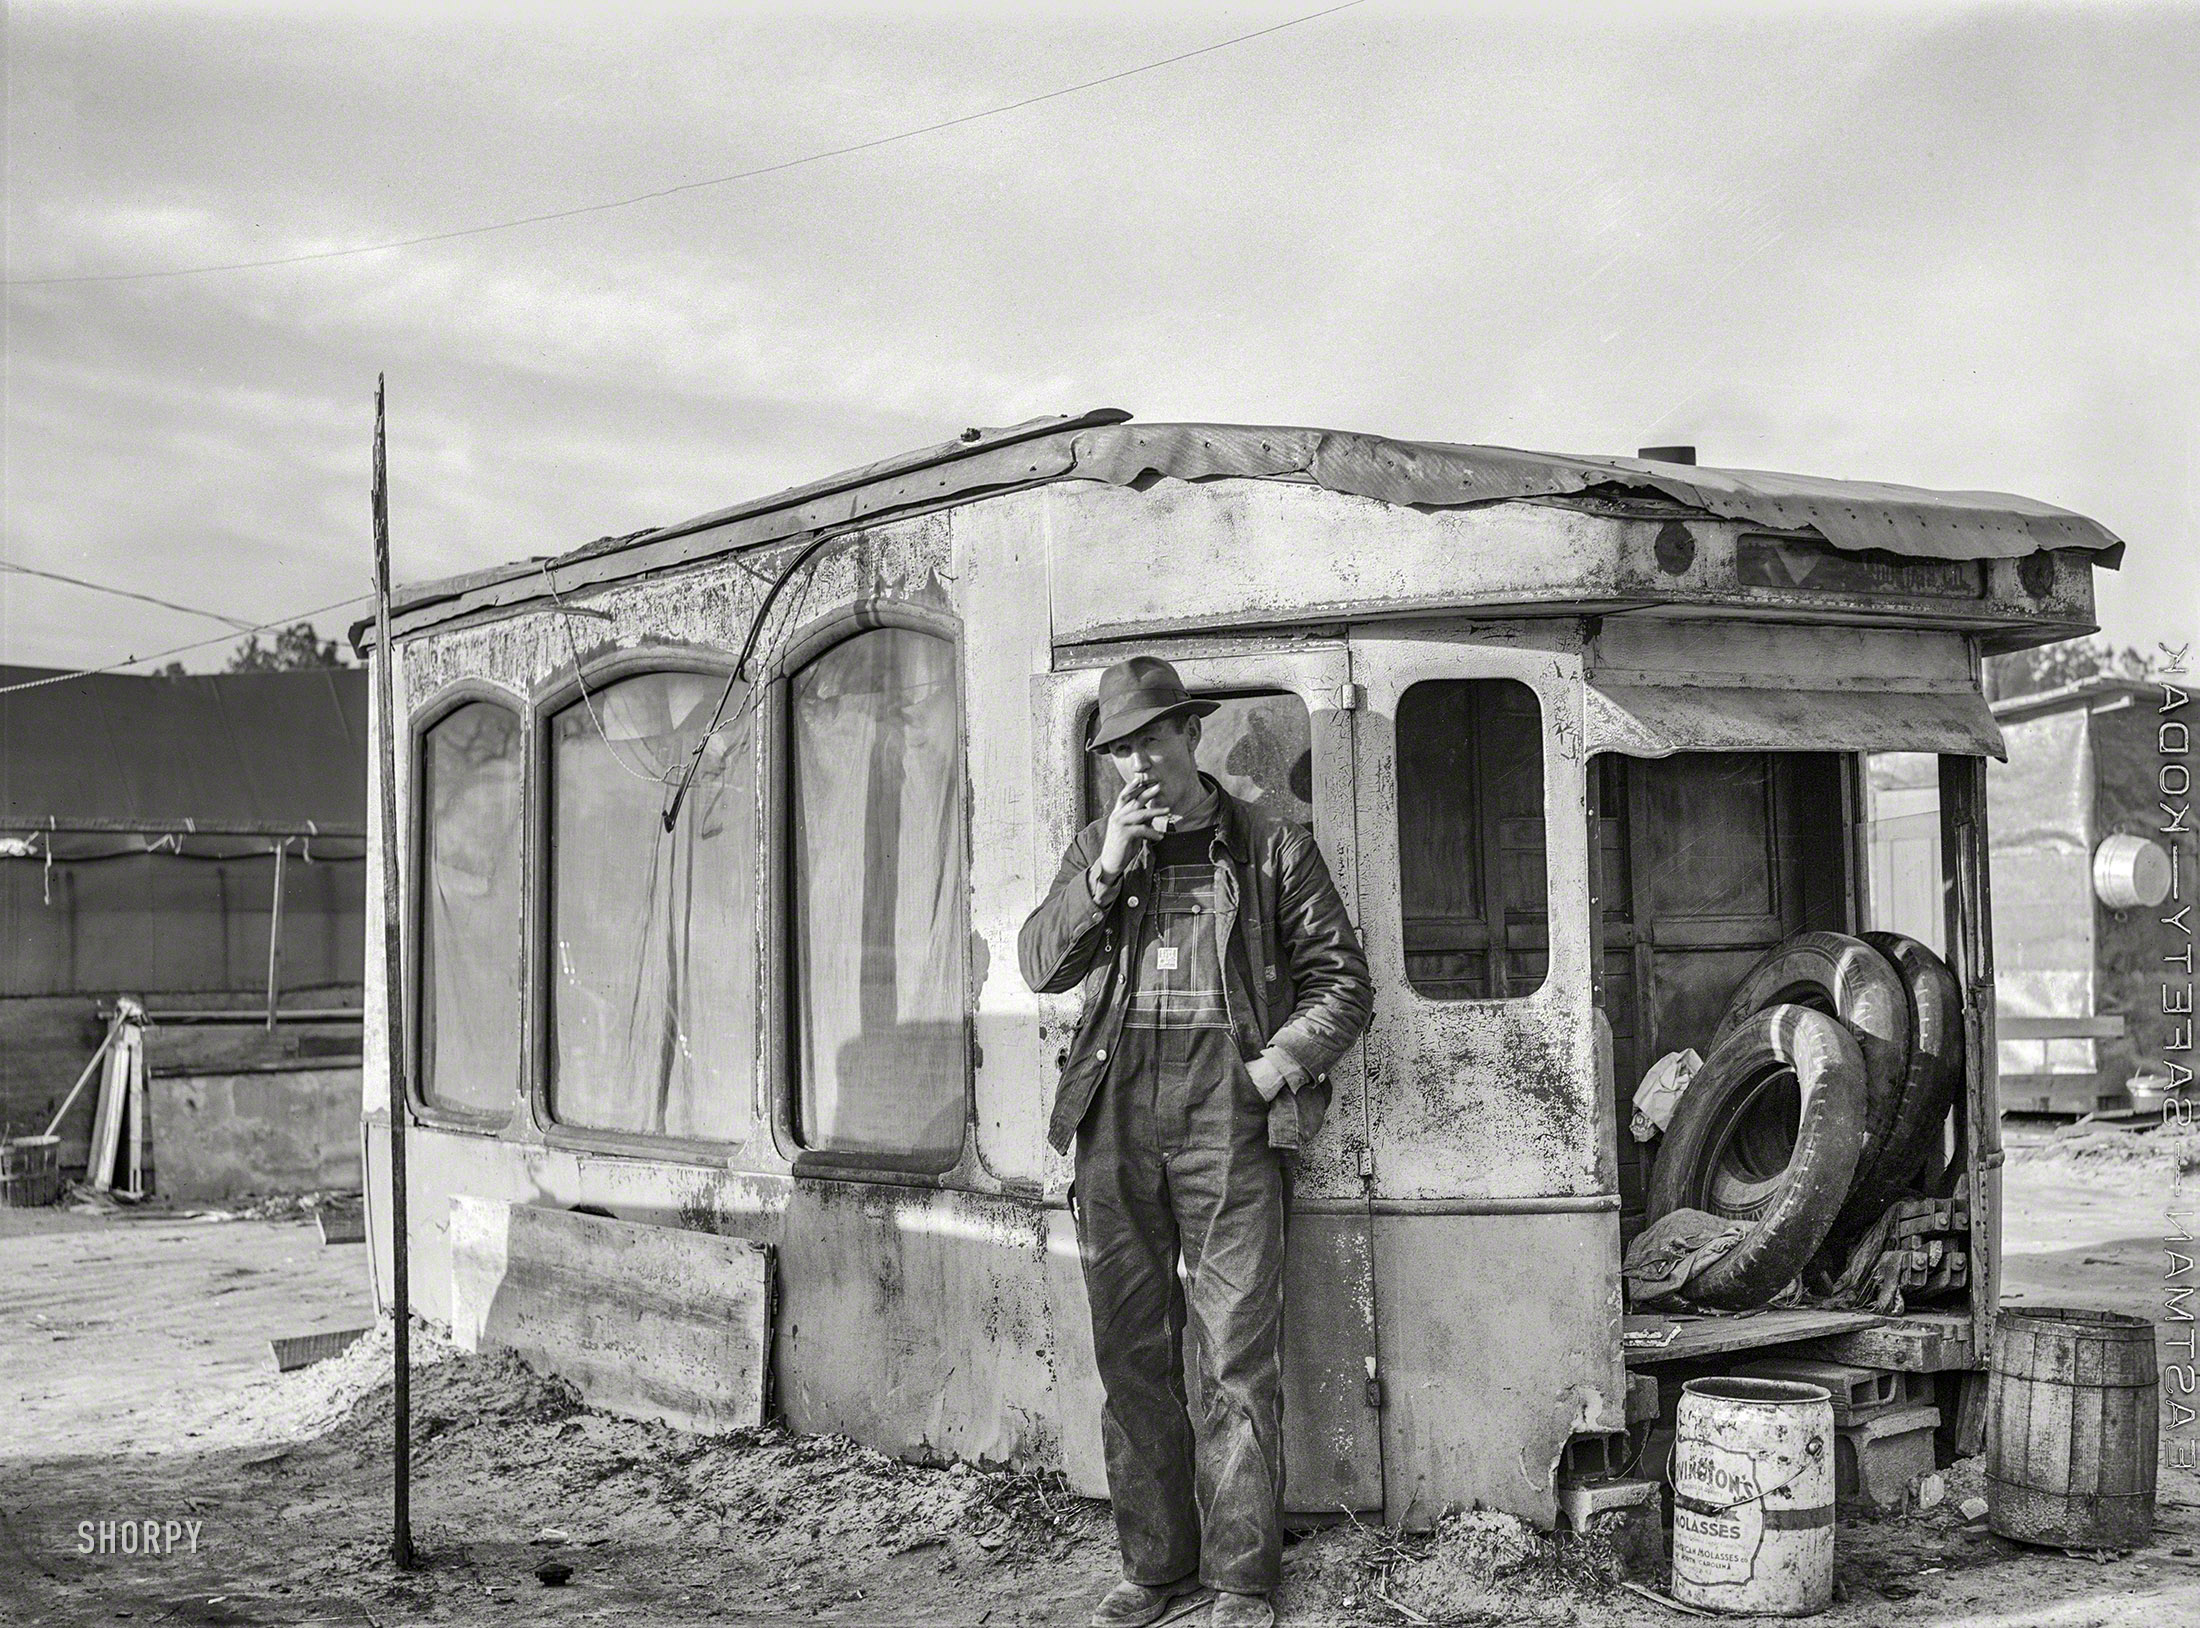 March 1941. "Construction worker from Fort Bragg. He lives in this homemade bunkhouse in Manchester, North Carolina." Medium format acetate negative by Jack Delano for the Farm Security Administration. View full size.